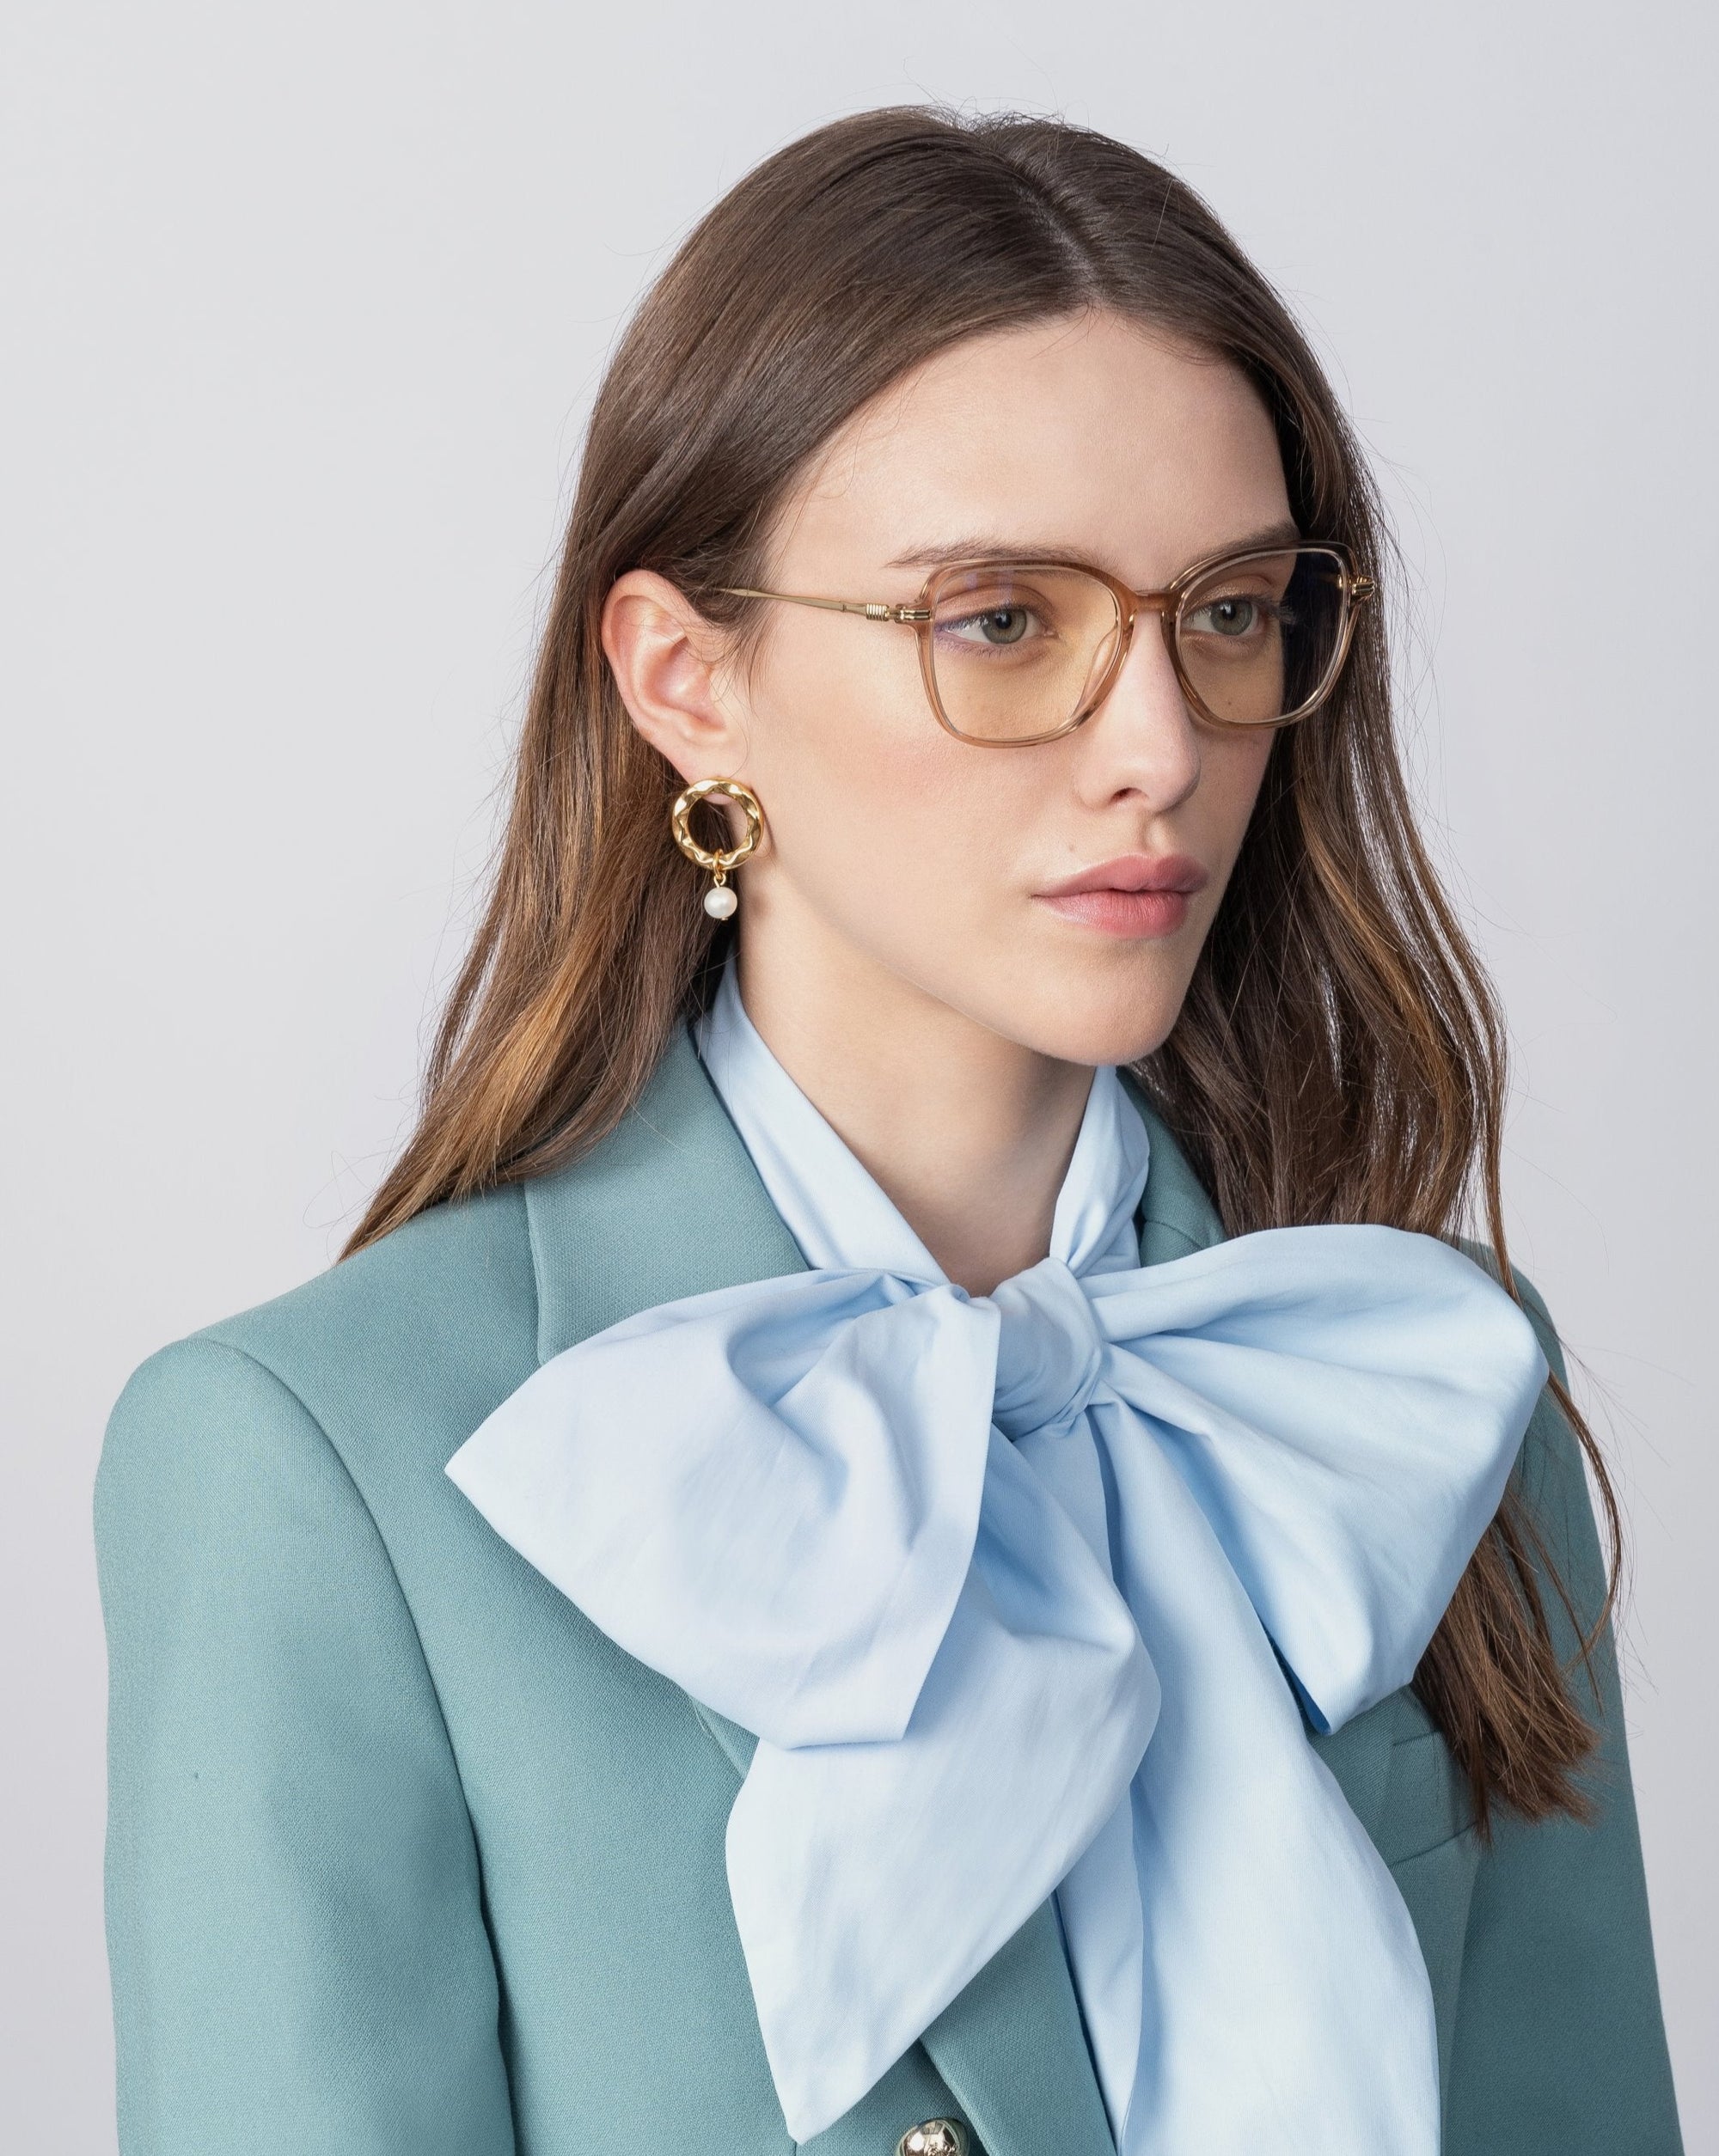 A woman with long brown hair wears transparent Sonnet glasses with blue light filter lenses by For Art&#39;s Sake®, a light teal blazer, and a large light blue bow blouse. She also has large, 18-karat gold-plated earrings. The background is plain and light-colored.